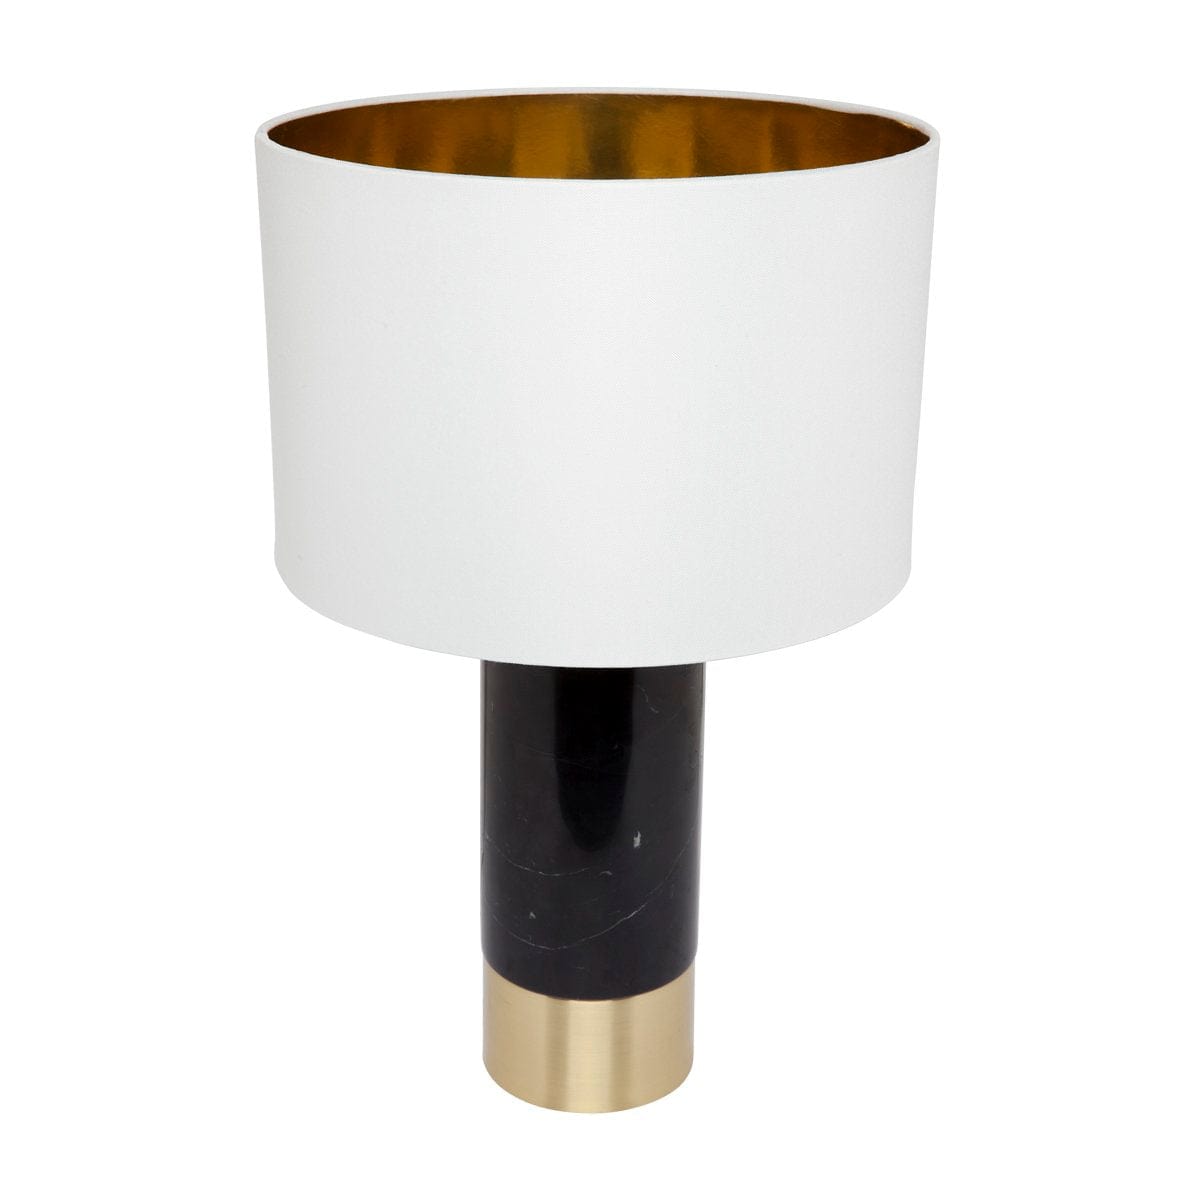 CAFE LIGHTING & LIVING Table Lamp Paola Marble Table Lamp - Black w White Shade B12272